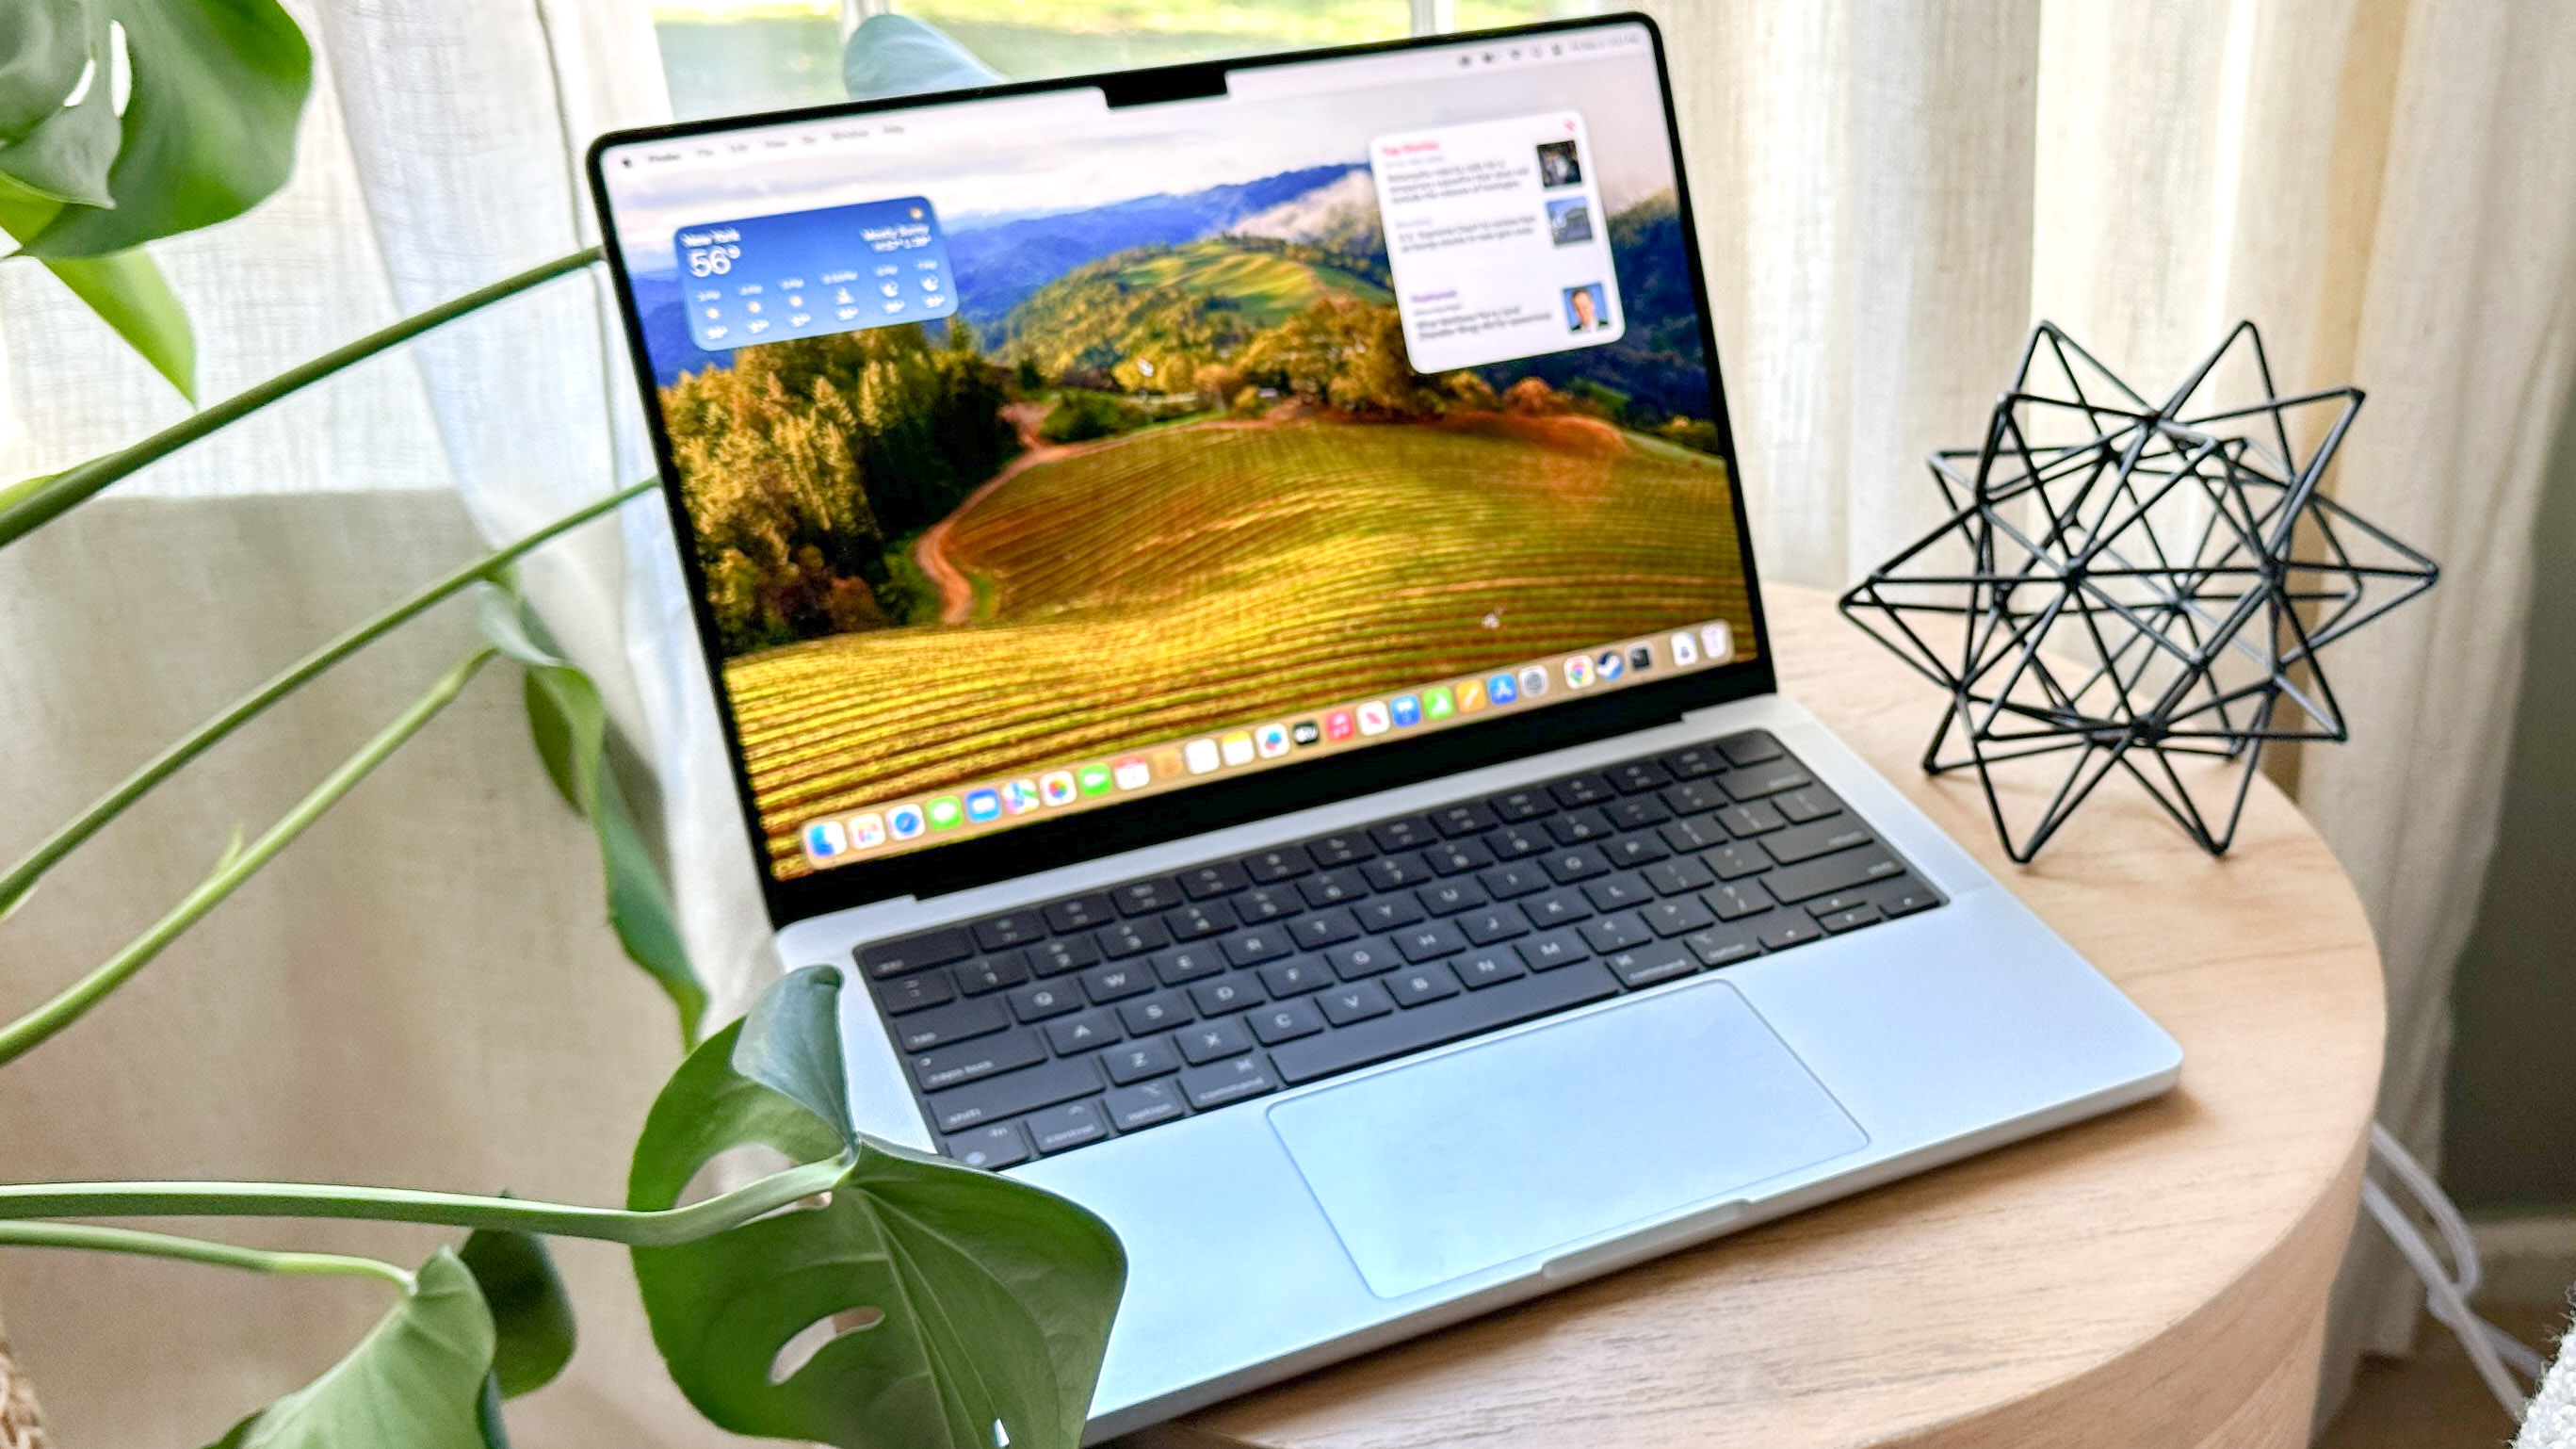 12 Best Webcam Covers For Laptops You Can Buy (2020)